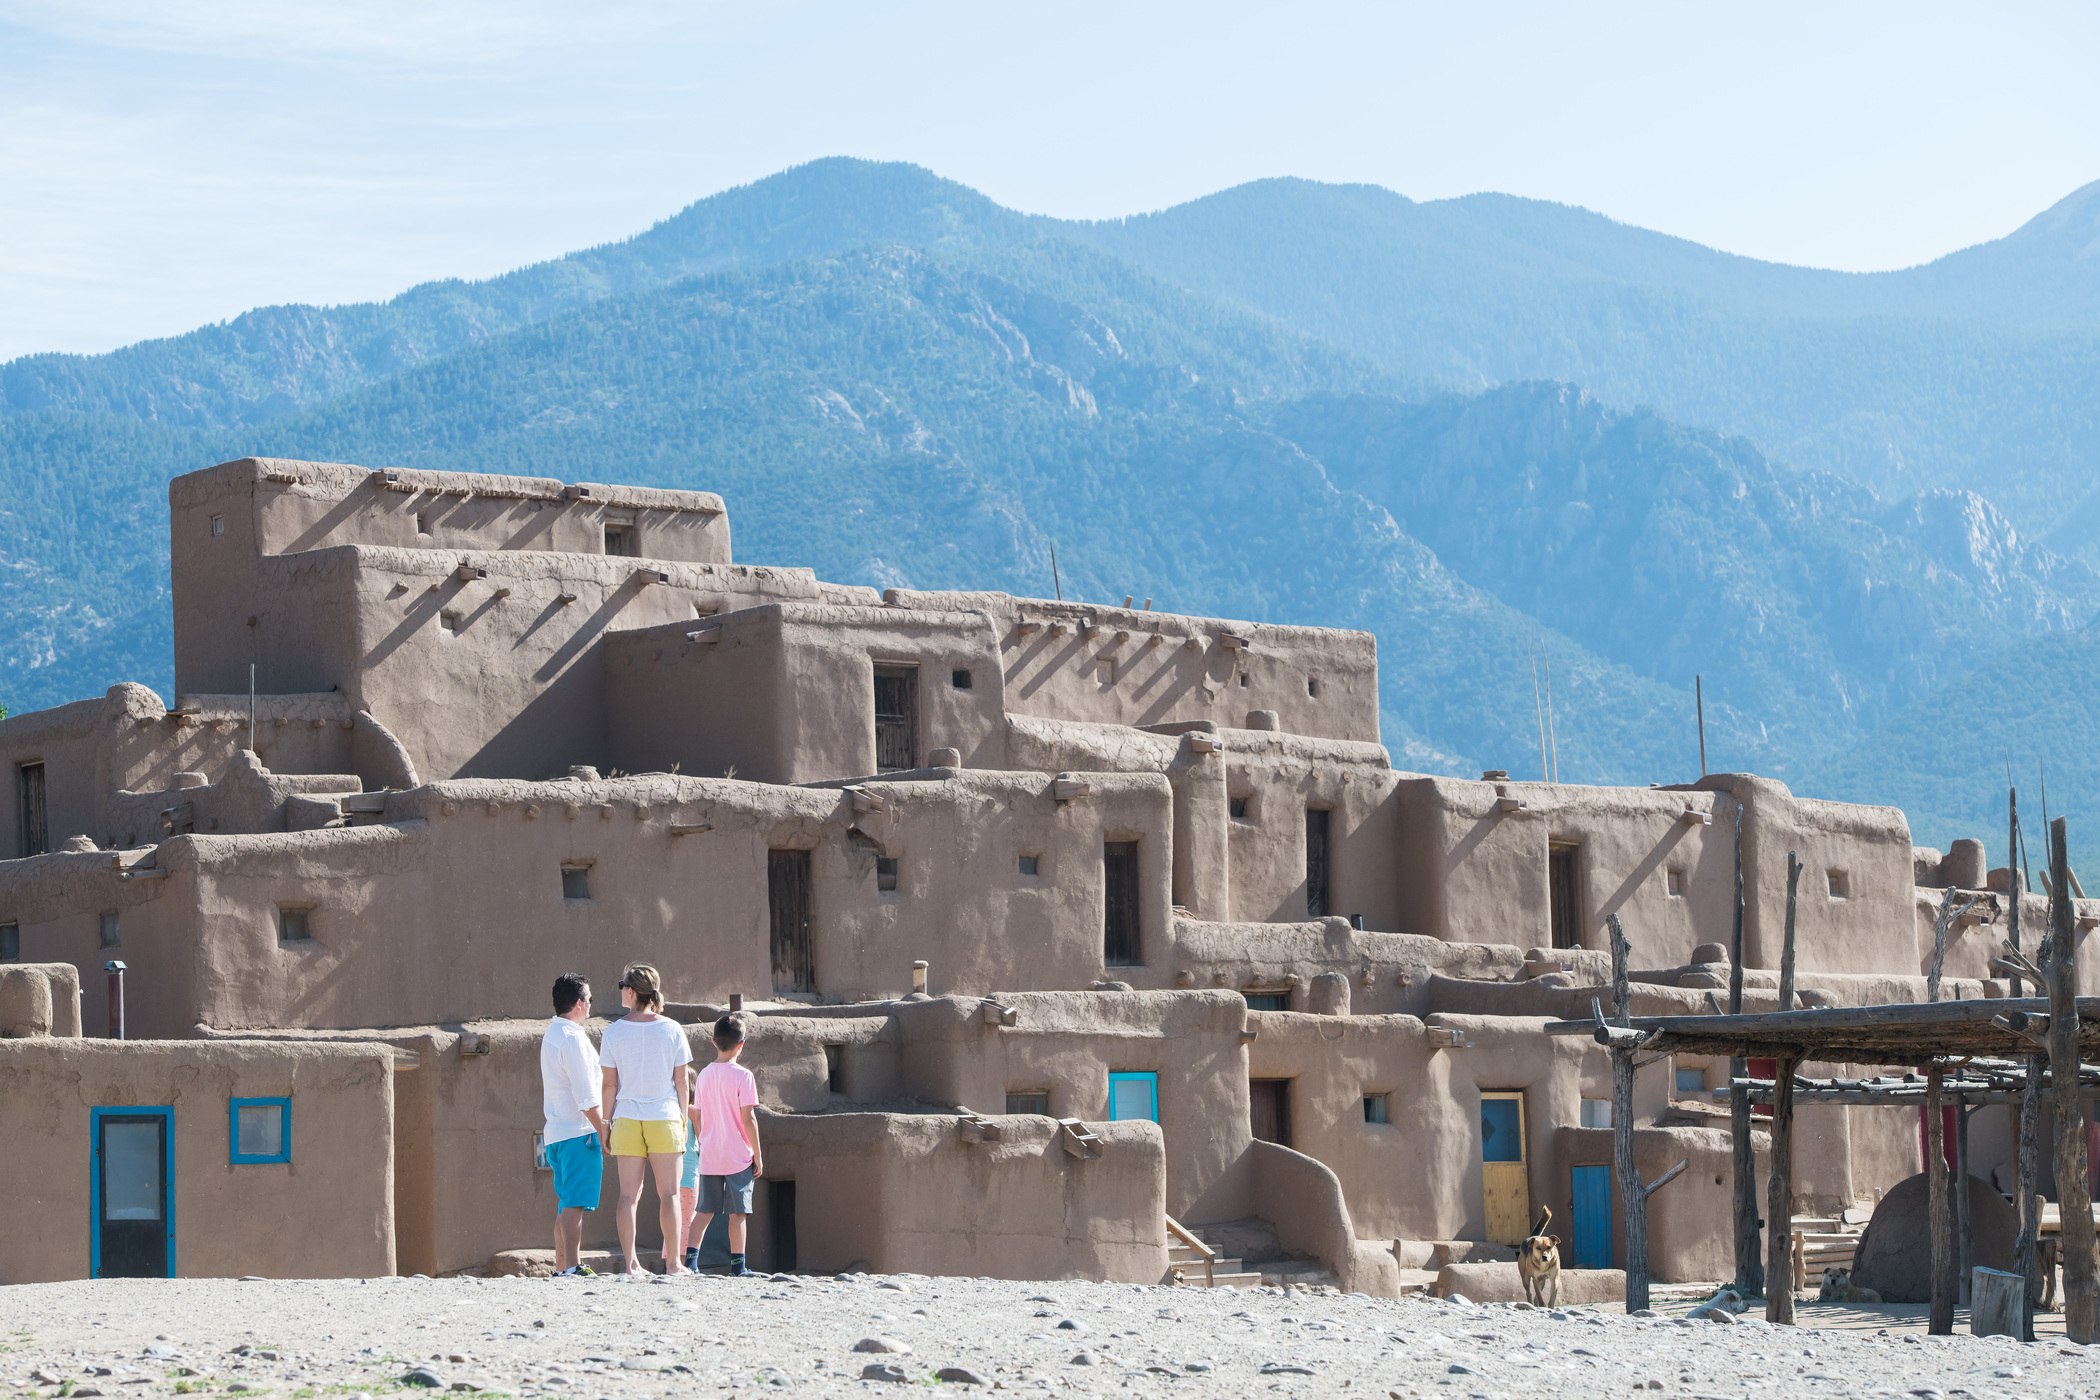 For centuries, Taos Pueblo has been (and remains) a home of the Tiwa people.